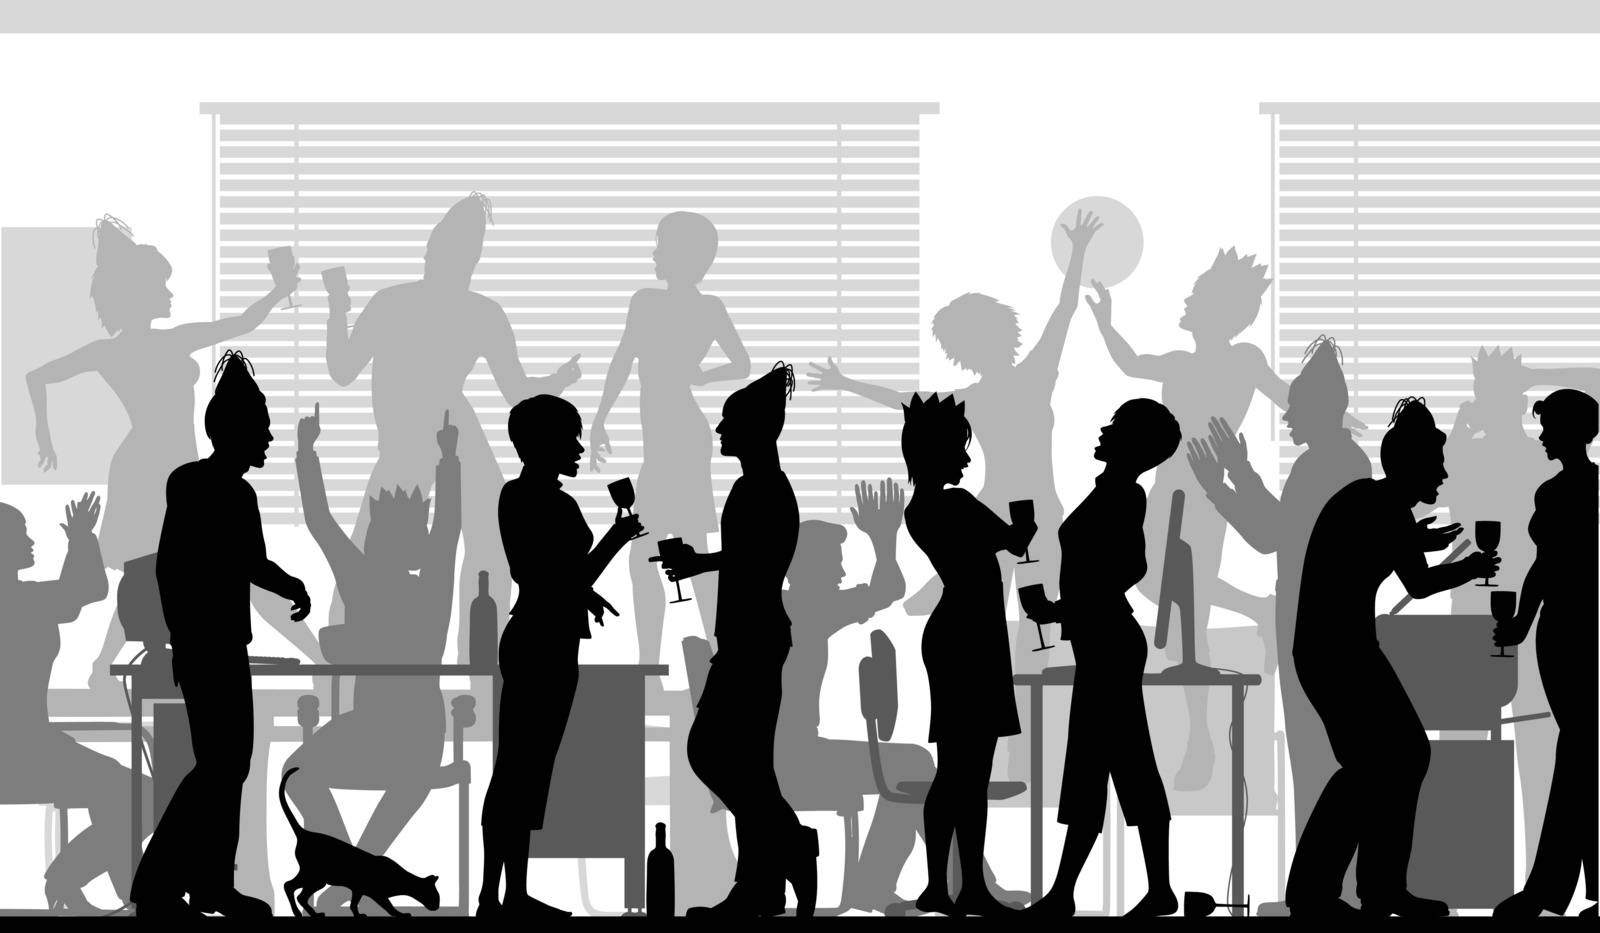 Editable vector silhouettes of business people at an office party with all elements as separate objects